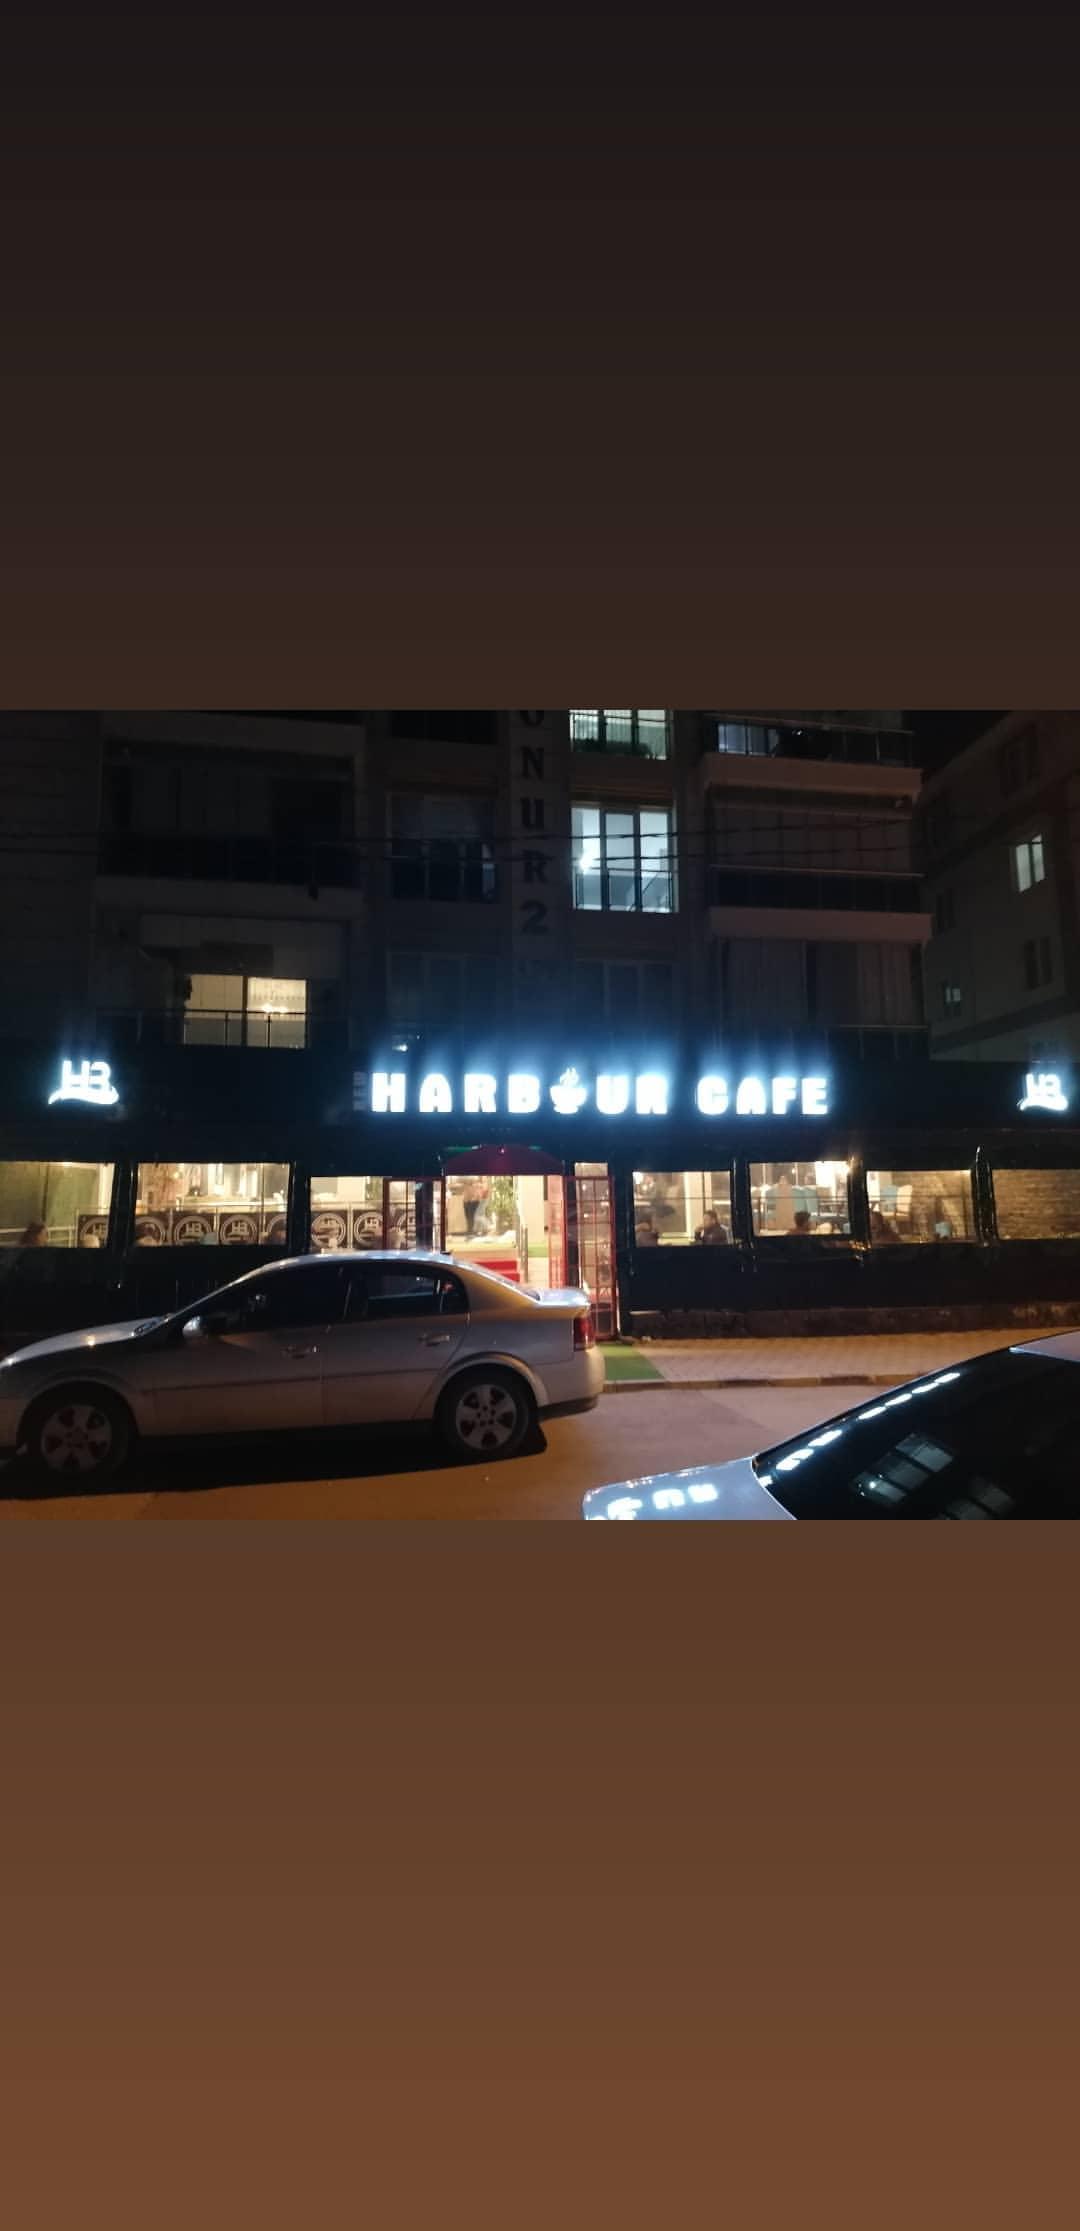 New harbour cafe